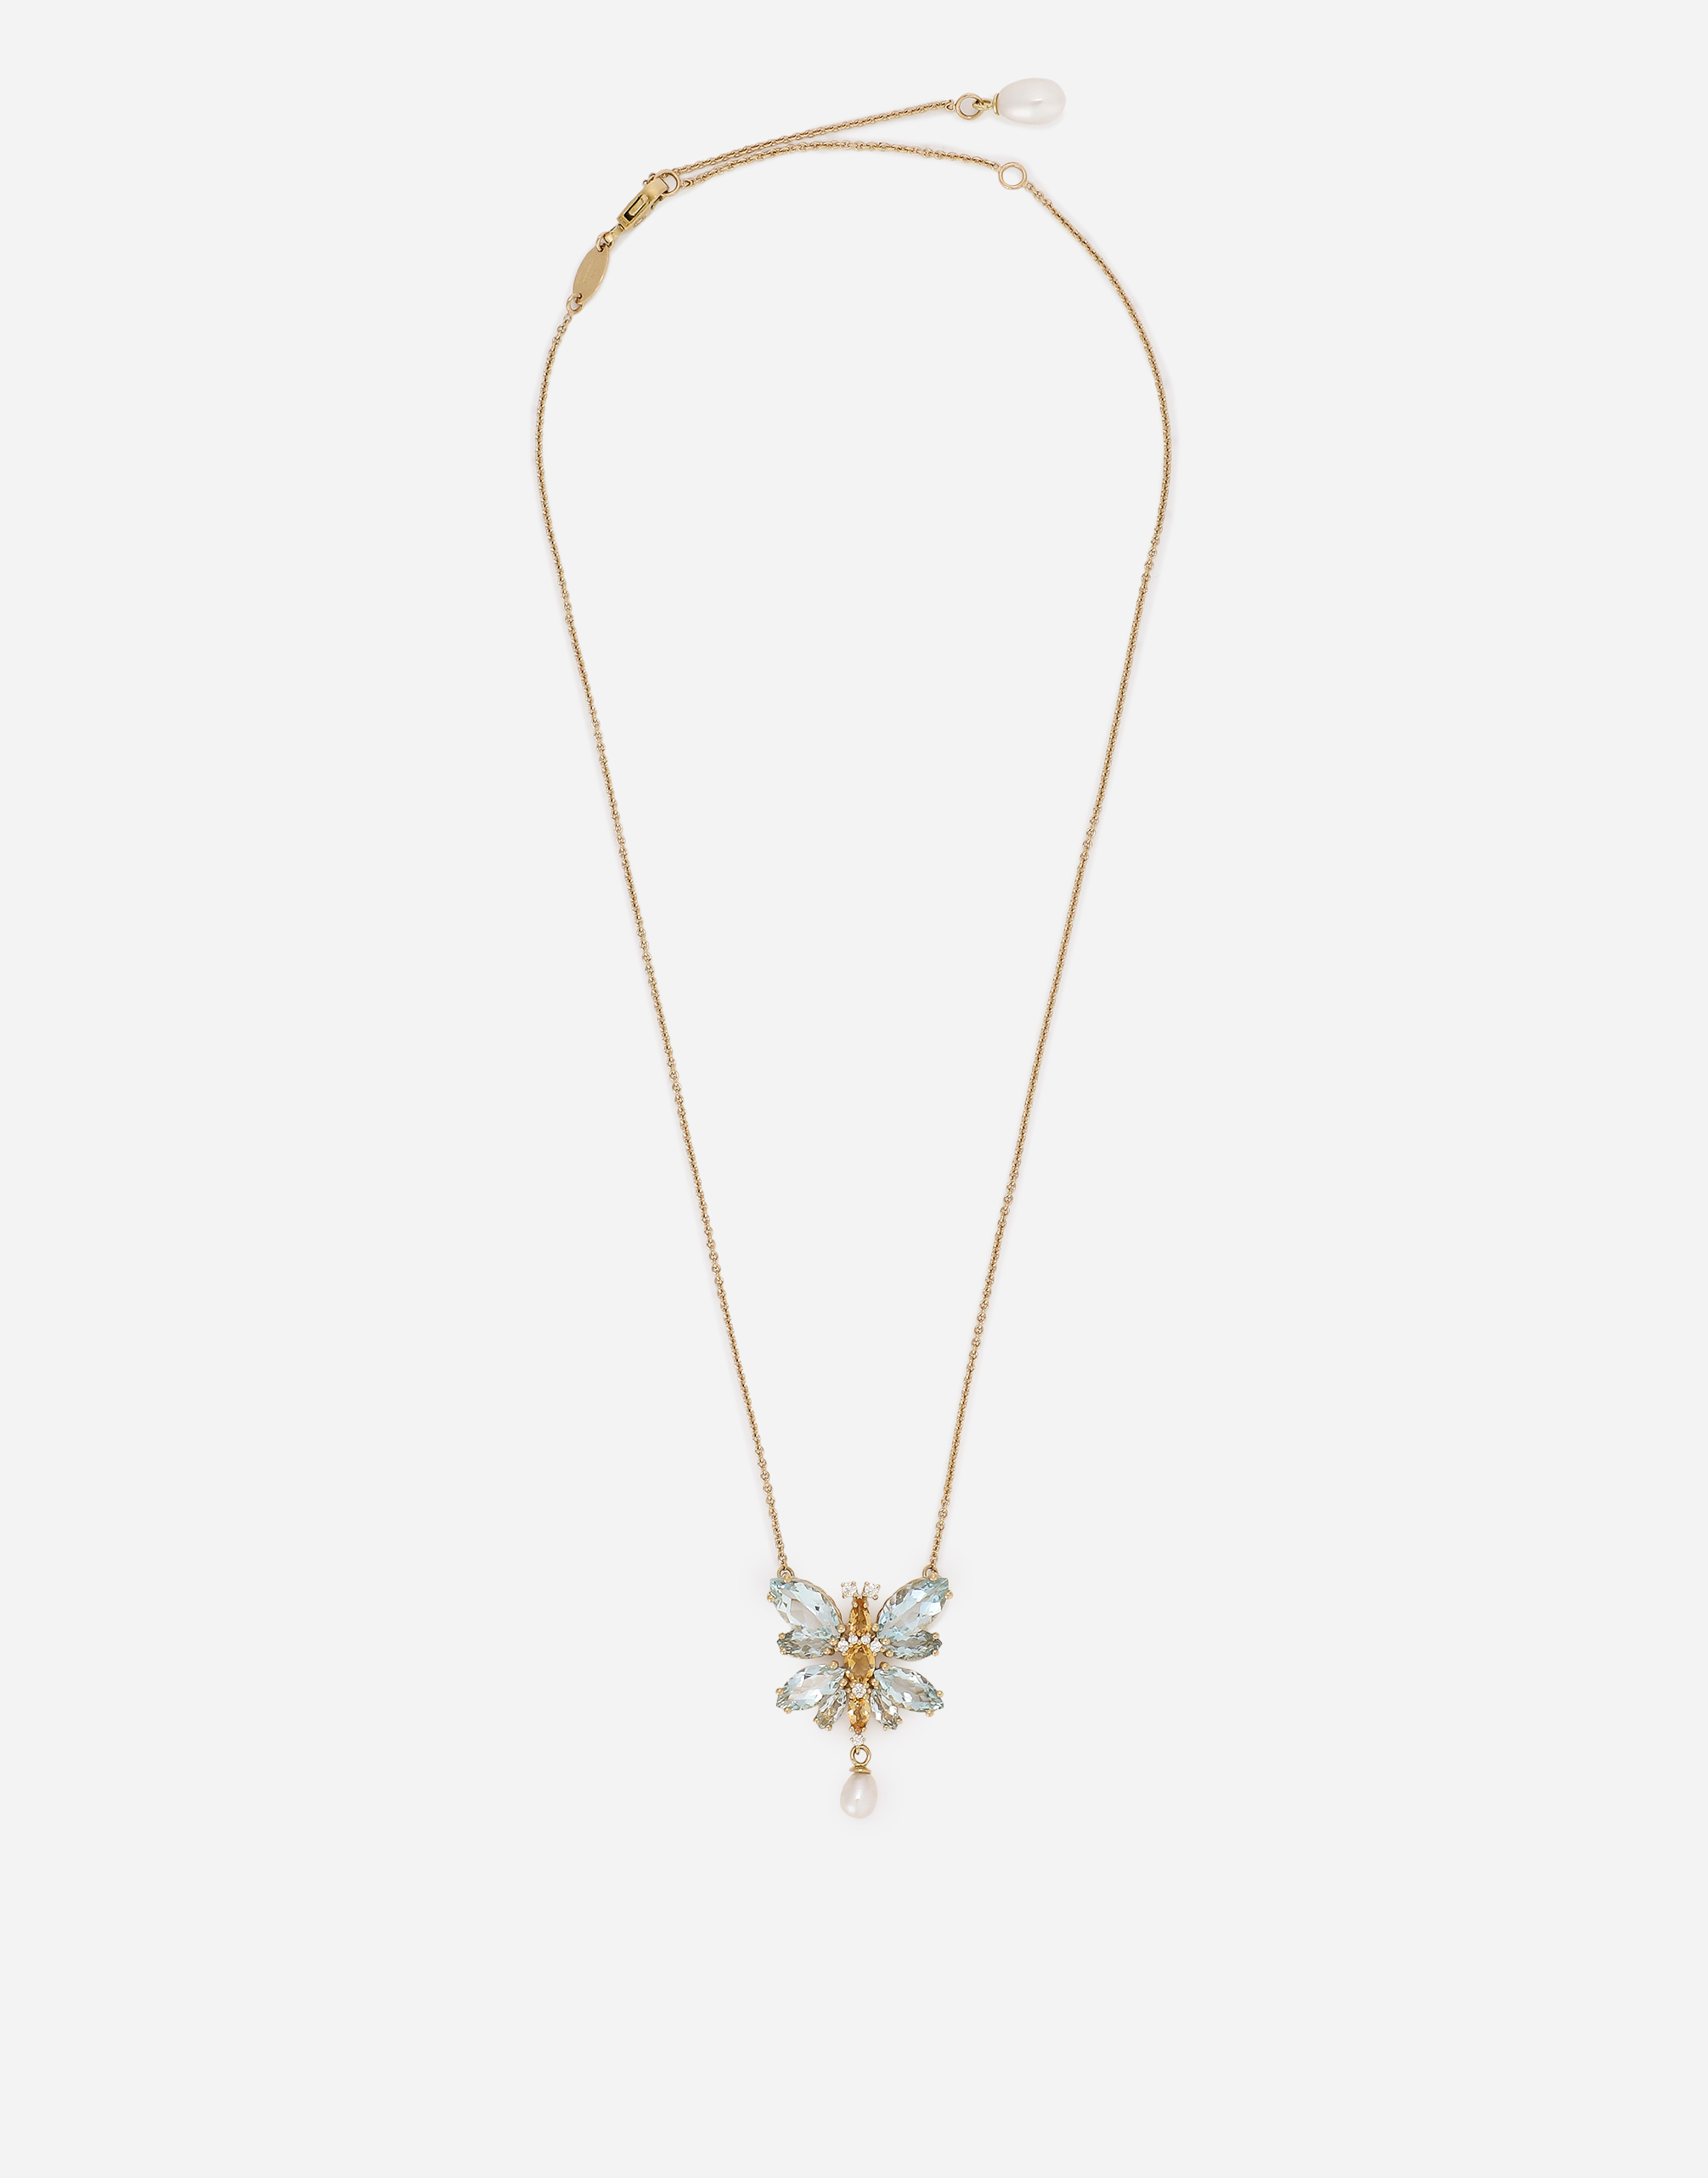 Dolce & Gabbana Spring Necklace In Yellow 18kt Gold With Aquamarine Butterfly Gold Female Onesize